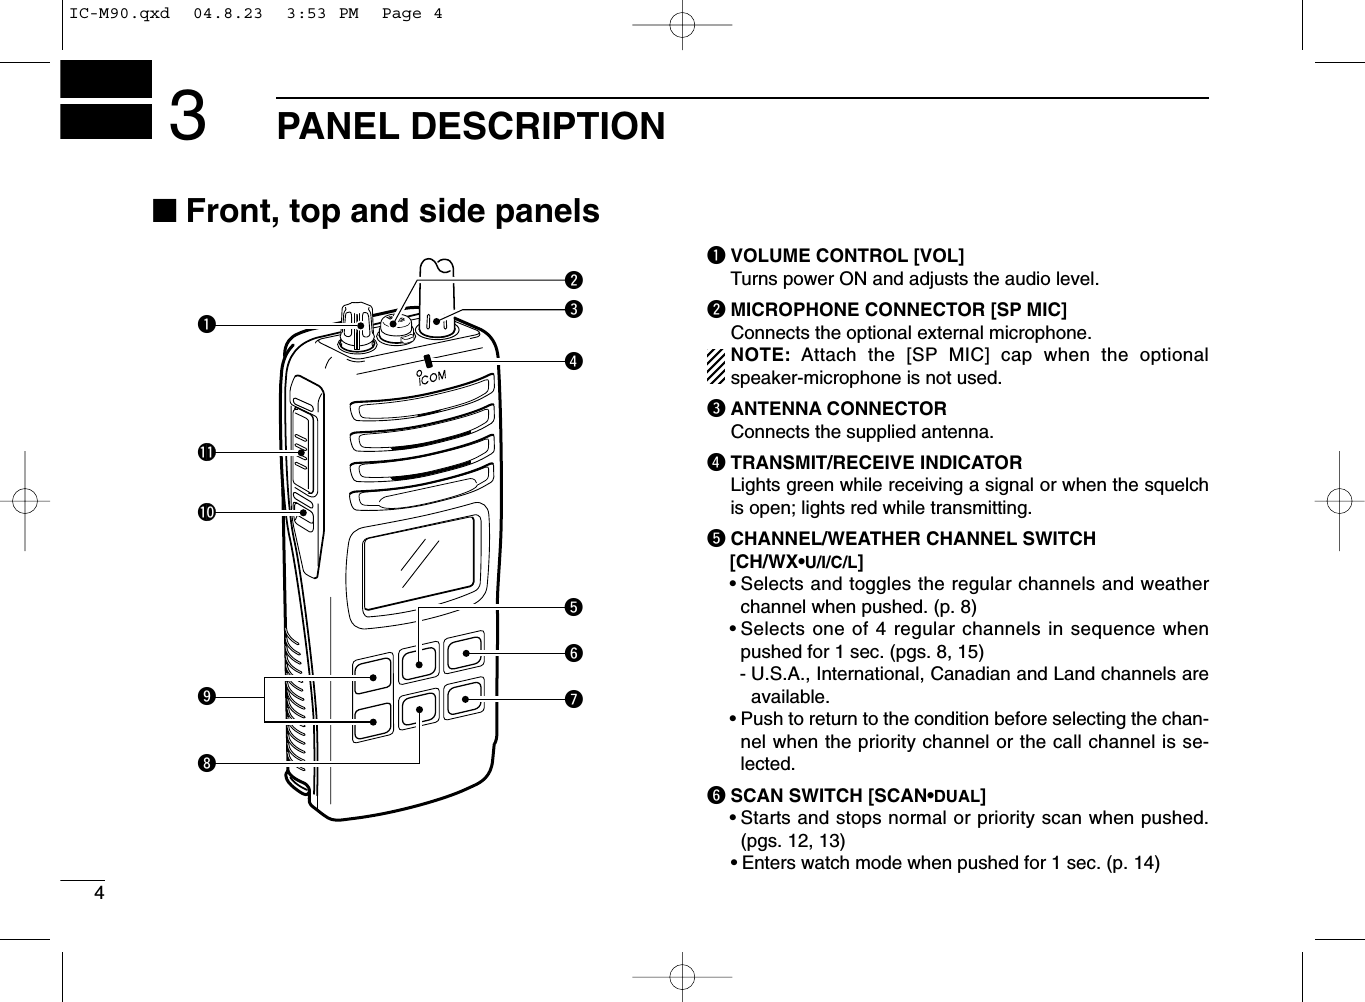 4PANEL DESCRIPTION3■Front, top and side panelsqVOLUME CONTROL [VOL]Turns power ON and adjusts the audio level.wMICROPHONE CONNECTOR [SP MIC]Connects the optional external microphone.NOTE: Attach the [SP MIC] cap when the optionalspeaker-microphone is not used.eANTENNA CONNECTORConnects the supplied antenna.rTRANSMIT/RECEIVE INDICATORLights green while receiving a signal or when the squelchis open; lights red while transmitting.tCHANNEL/WEATHER CHANNEL SWITCH[CH/WX•U/I/C/L]•Selects and toggles the regular channels and weatherchannel when pushed. (p. 8)•Selects one of 4 regular channels in sequence whenpushed for 1 sec. (pgs. 8, 15)- U.S.A., International, Canadian and Land channels areavailable.•Push to return to the condition before selecting the chan-nel when the priority channel or the call channel is se-lected.ySCAN SWITCH [SCAN•DUAL]•Starts and stops normal or priority scan when pushed.(pgs. 12, 13)•Enters watch mode when pushed for 1 sec. (p. 14)MIC  /SPqerytwiuo!1!0IC-M90.qxd  04.8.23  3:53 PM  Page 4